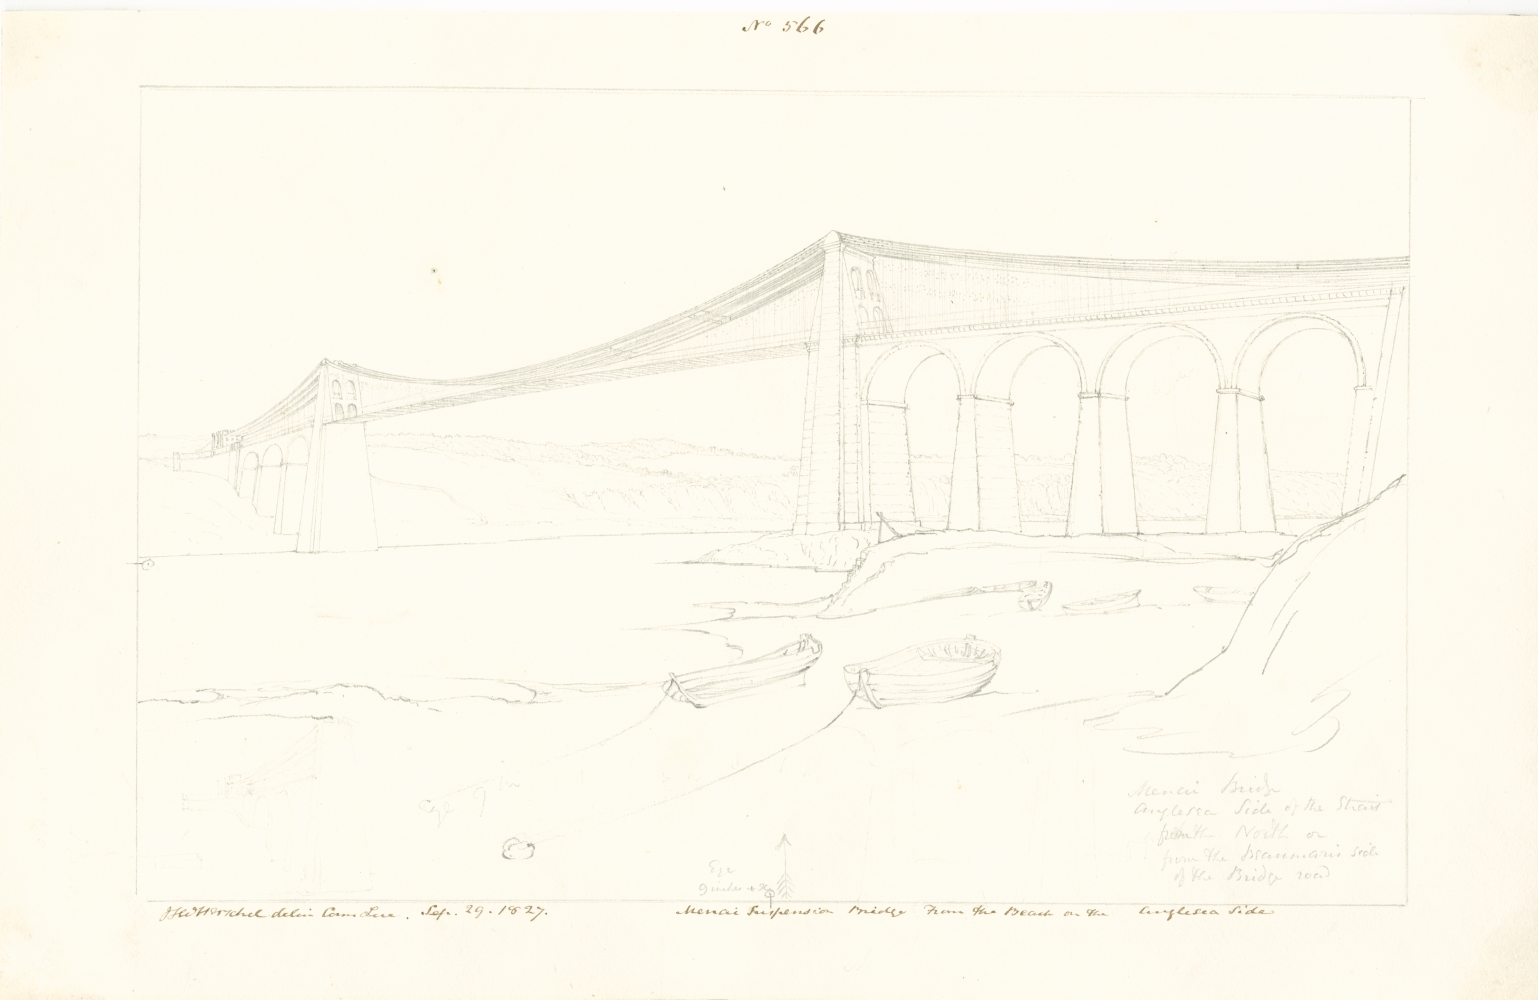 Sir John Frederick William HERSCHEL (English, 1792-1872) "No 566 Menai Suspension Bridge From the Beach on the Anglesea Side”, 29 September 1827 Camera lucida drawing, pencil on paper 19.9 x 30.9 cm on 24.3 x 37.7 cm paper Watermark “J Whatman Turkey Mill”. Numbered, signed, dated and titled “No 566 / JFW Herschel delin Cam. / Luc. Sep 29, 1827. / Menai Suspension Bridge From the Beach on the Anglesea Side” in ink in border, and “Eye 9 inches = x. / Menai Bridge / Anglesea Side of the Strait / from the North or from the Beaumaris side of / the bridge road” in pencil. Inscribed "Menai Bridge / [illegible] from Anglesea side" in pencil on verso.